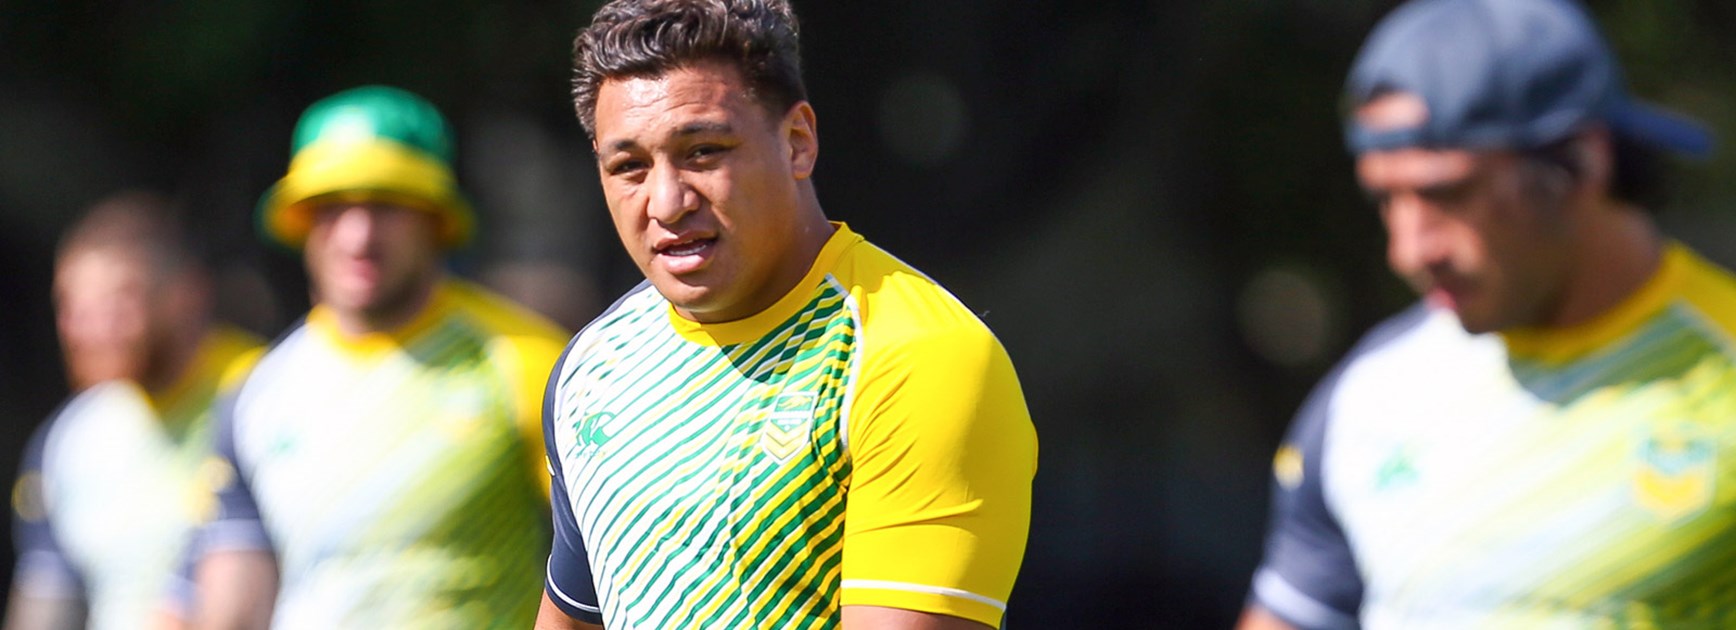 Josh Papalii in training with the Kangaroos ahead of the 2016 Downer Test Match.